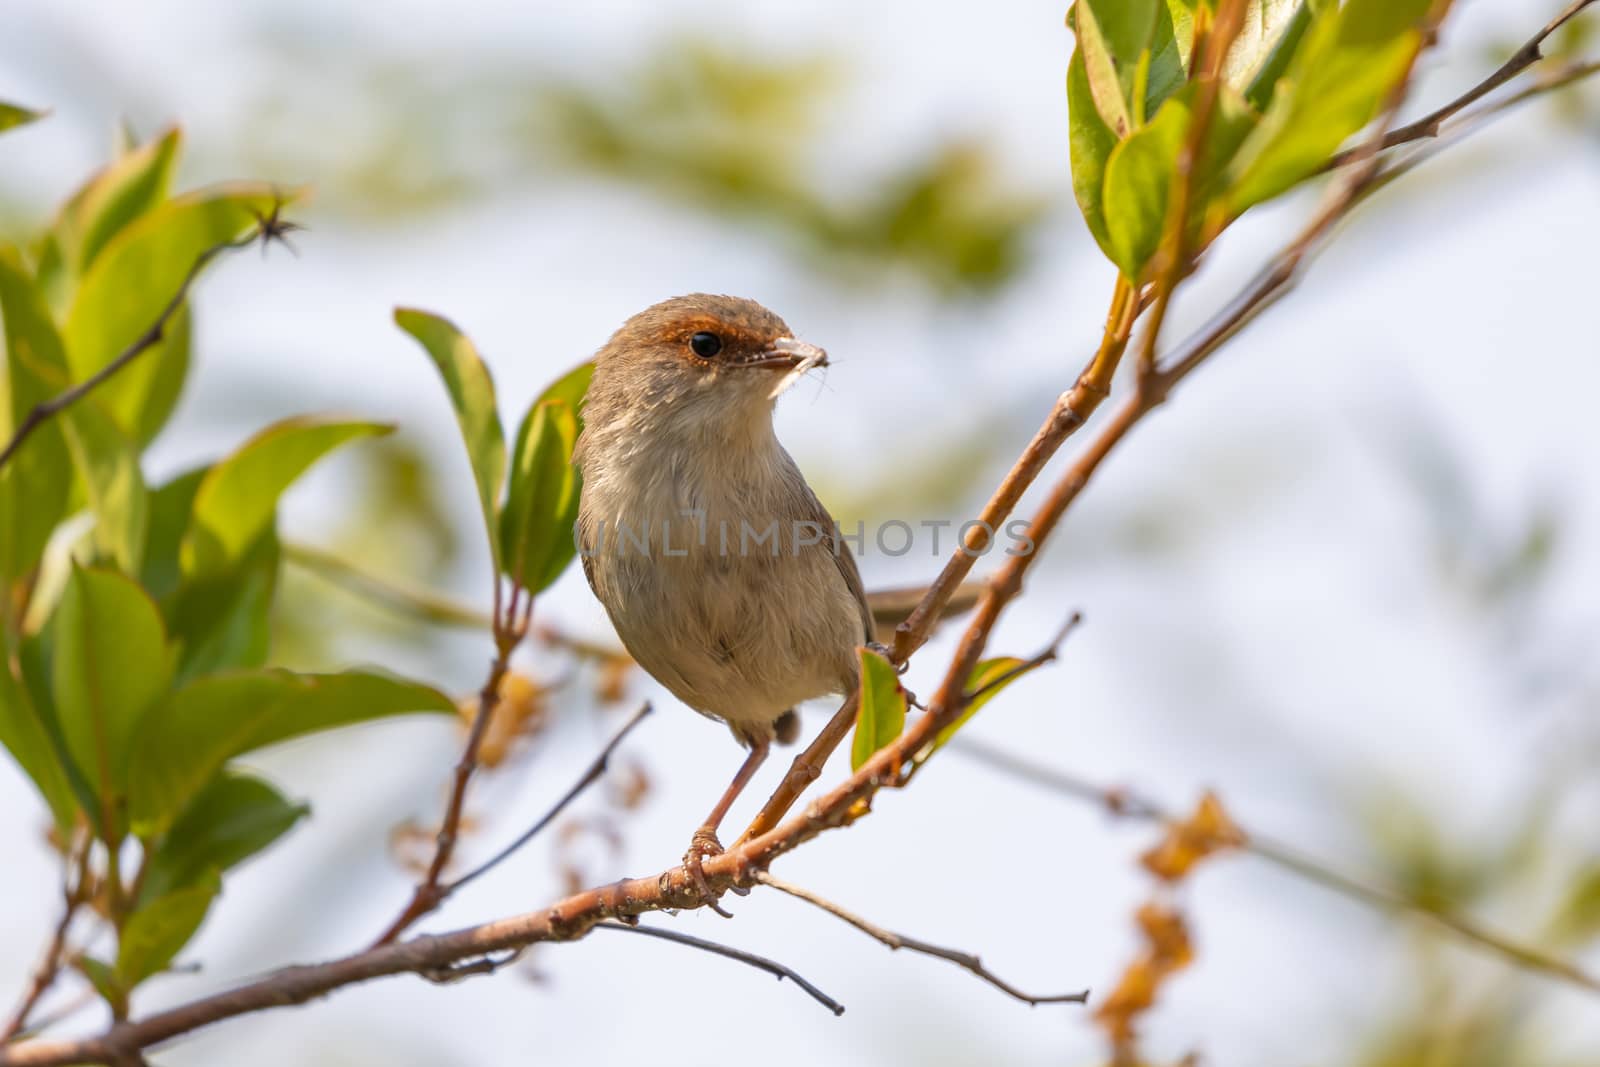 A female Superb Fairy-Wren sitting on a green branch by WittkePhotos